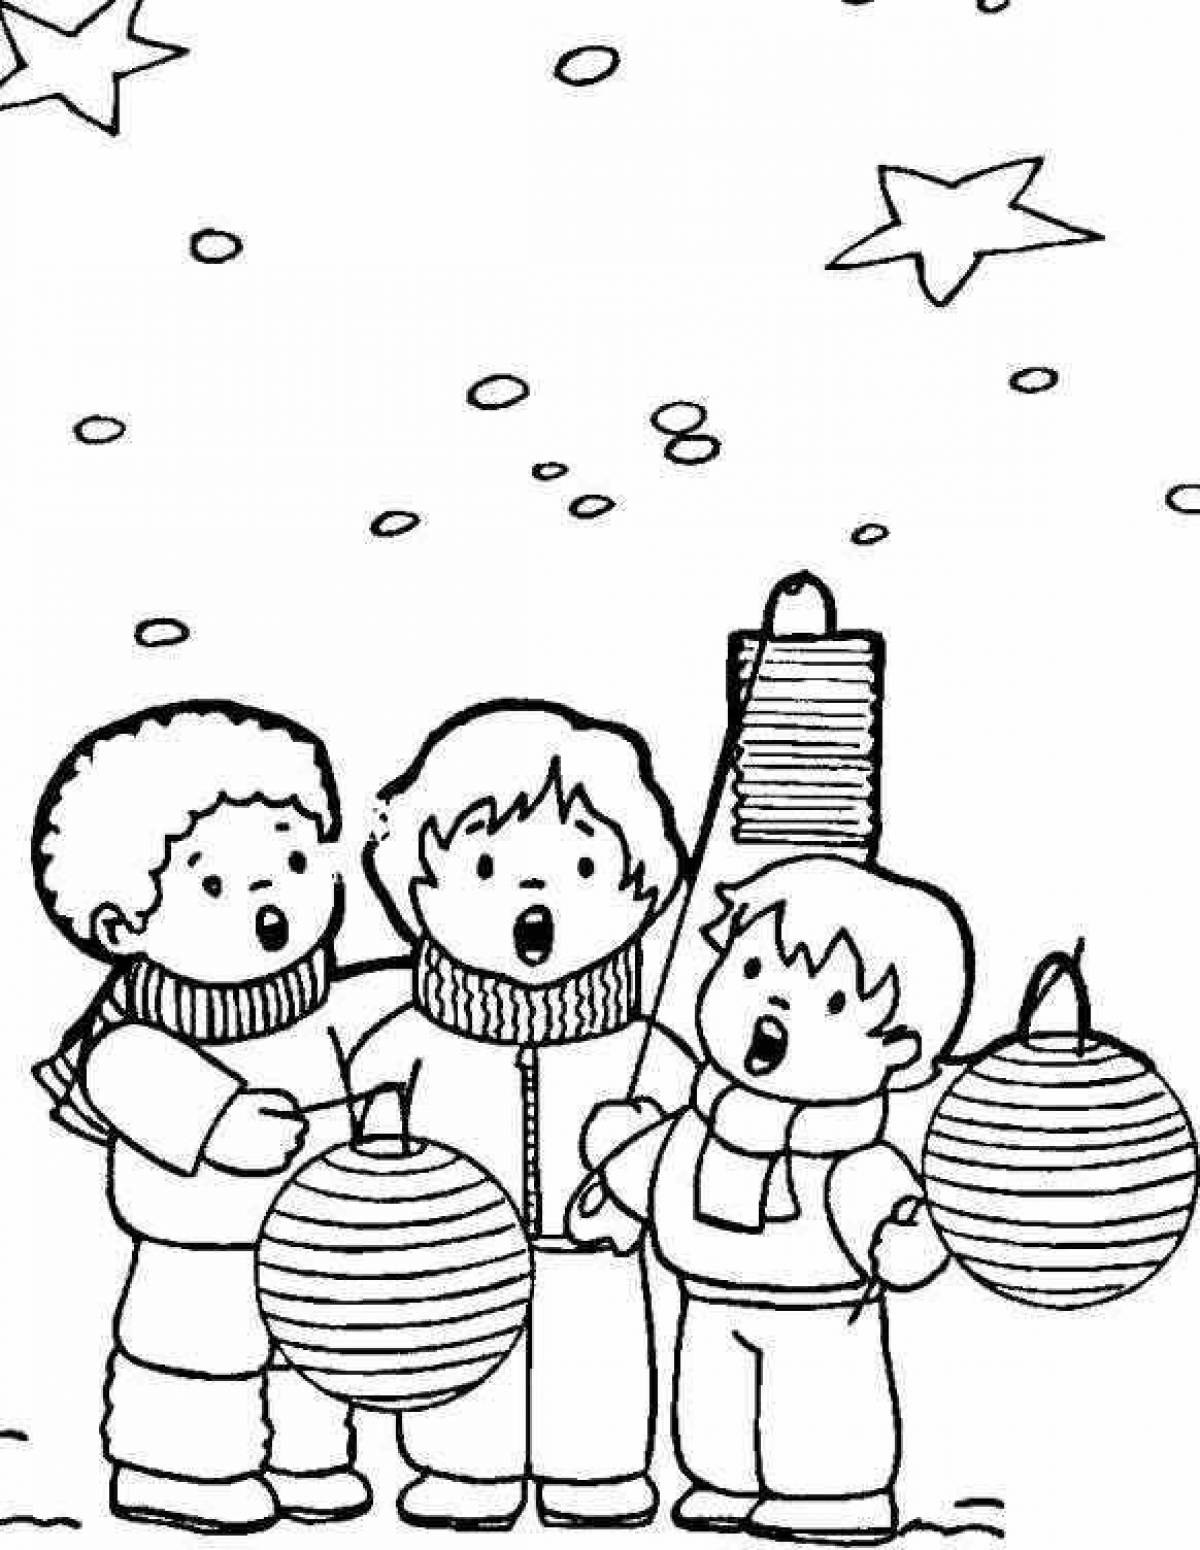 Festival song coloring page